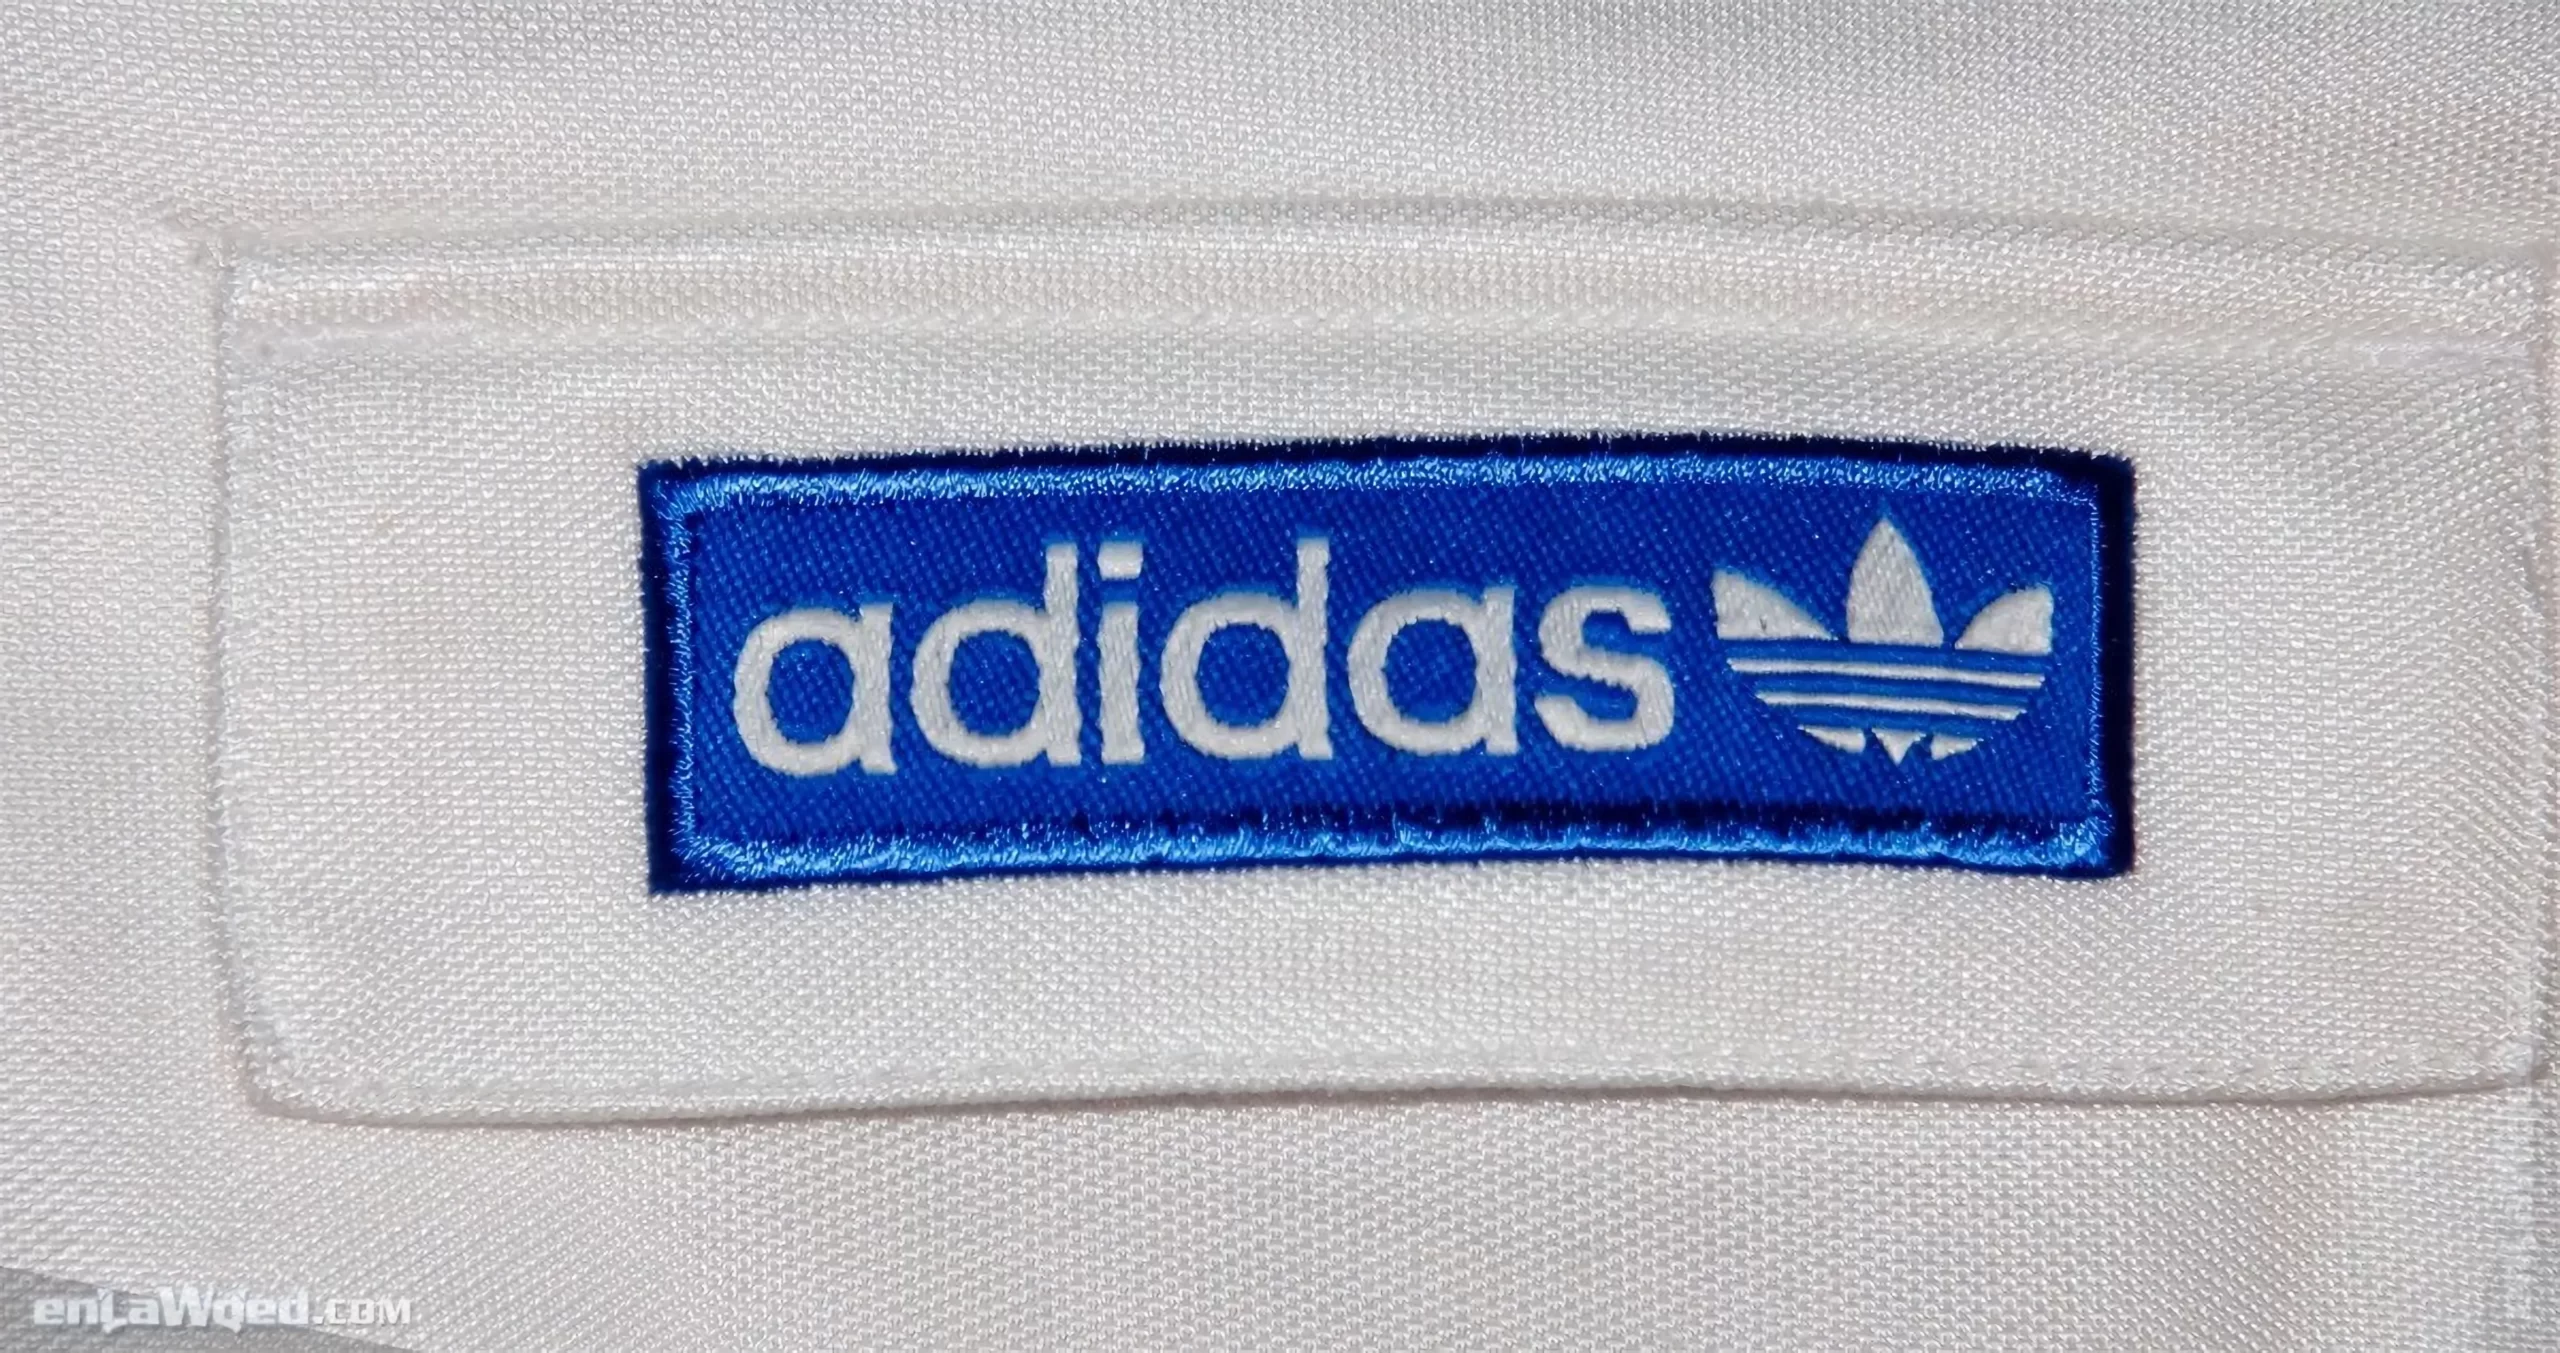 Men’s 2003 Greece Track Top by Adidas: Natural (EnLawded.com file #lmch4o7apo3cpw845sm)